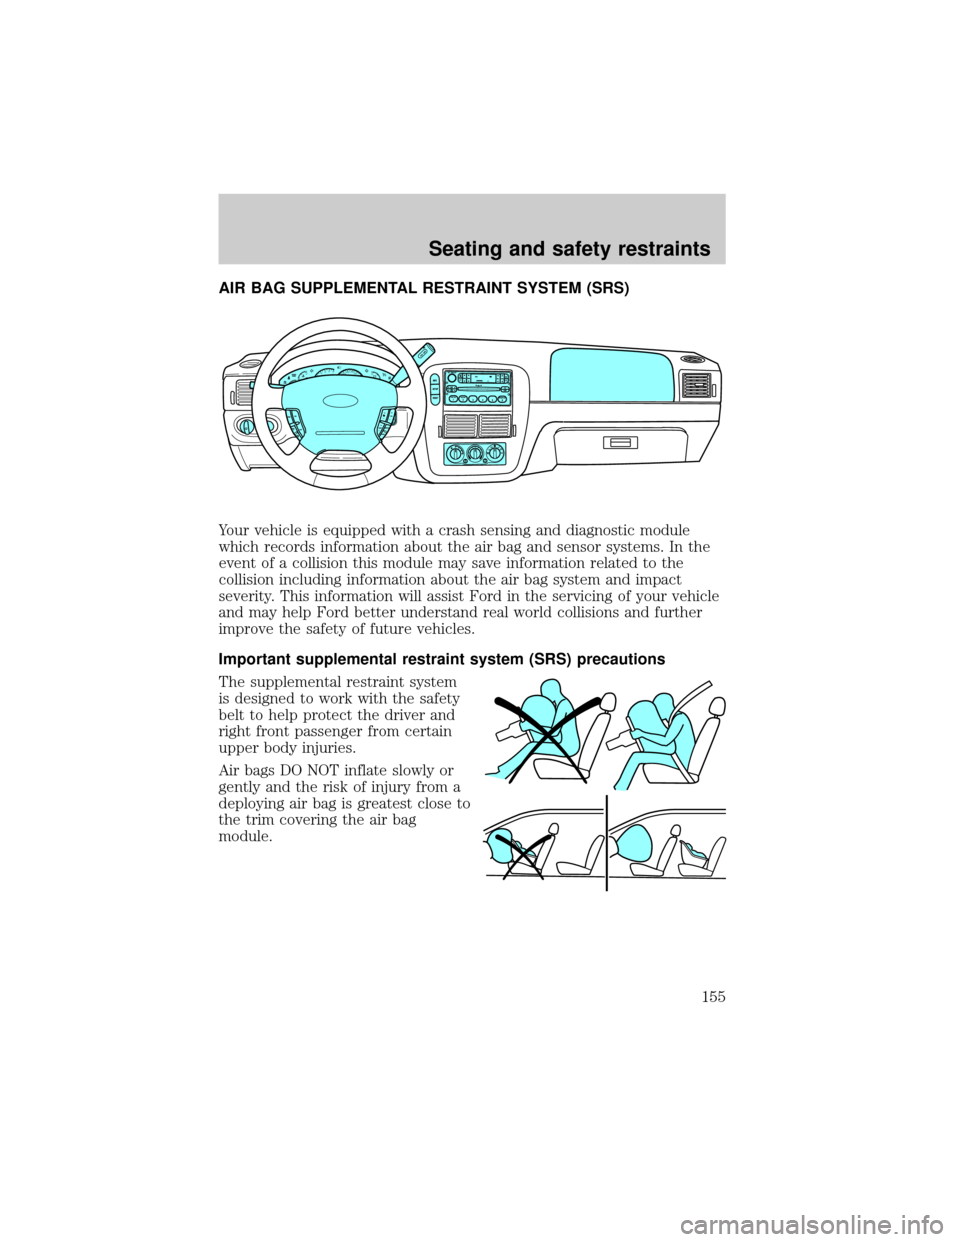 FORD EXPLORER 2002 3.G Owners Manual AIR BAG SUPPLEMENTAL RESTRAINT SYSTEM (SRS)
Your vehicle is equipped with a crash sensing and diagnostic module
which records information about the air bag and sensor systems. In the
event of a collis